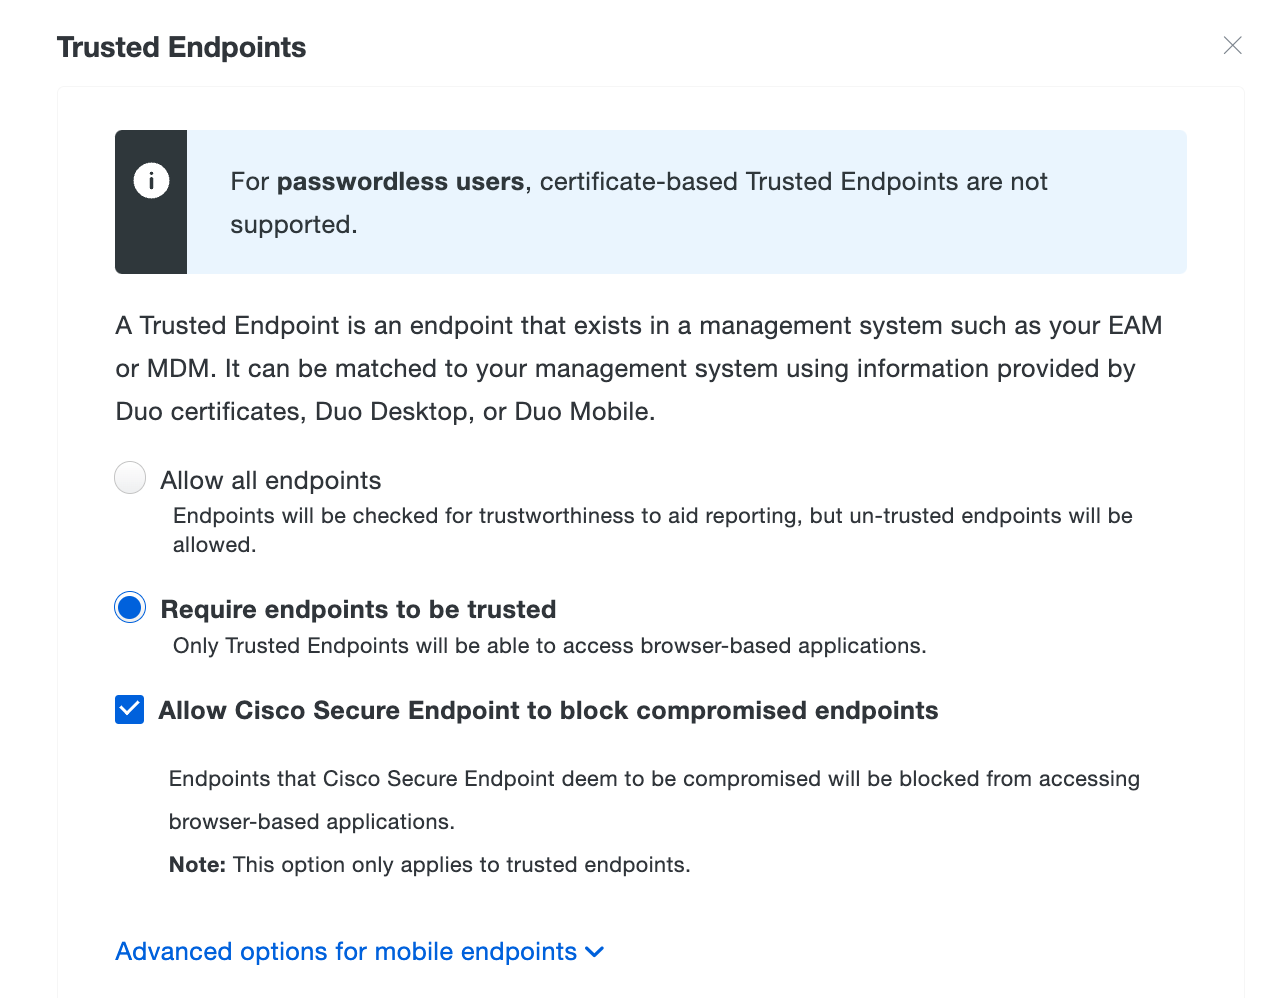 Trusted Endpoints Policy with Cisco Secure Endpoint